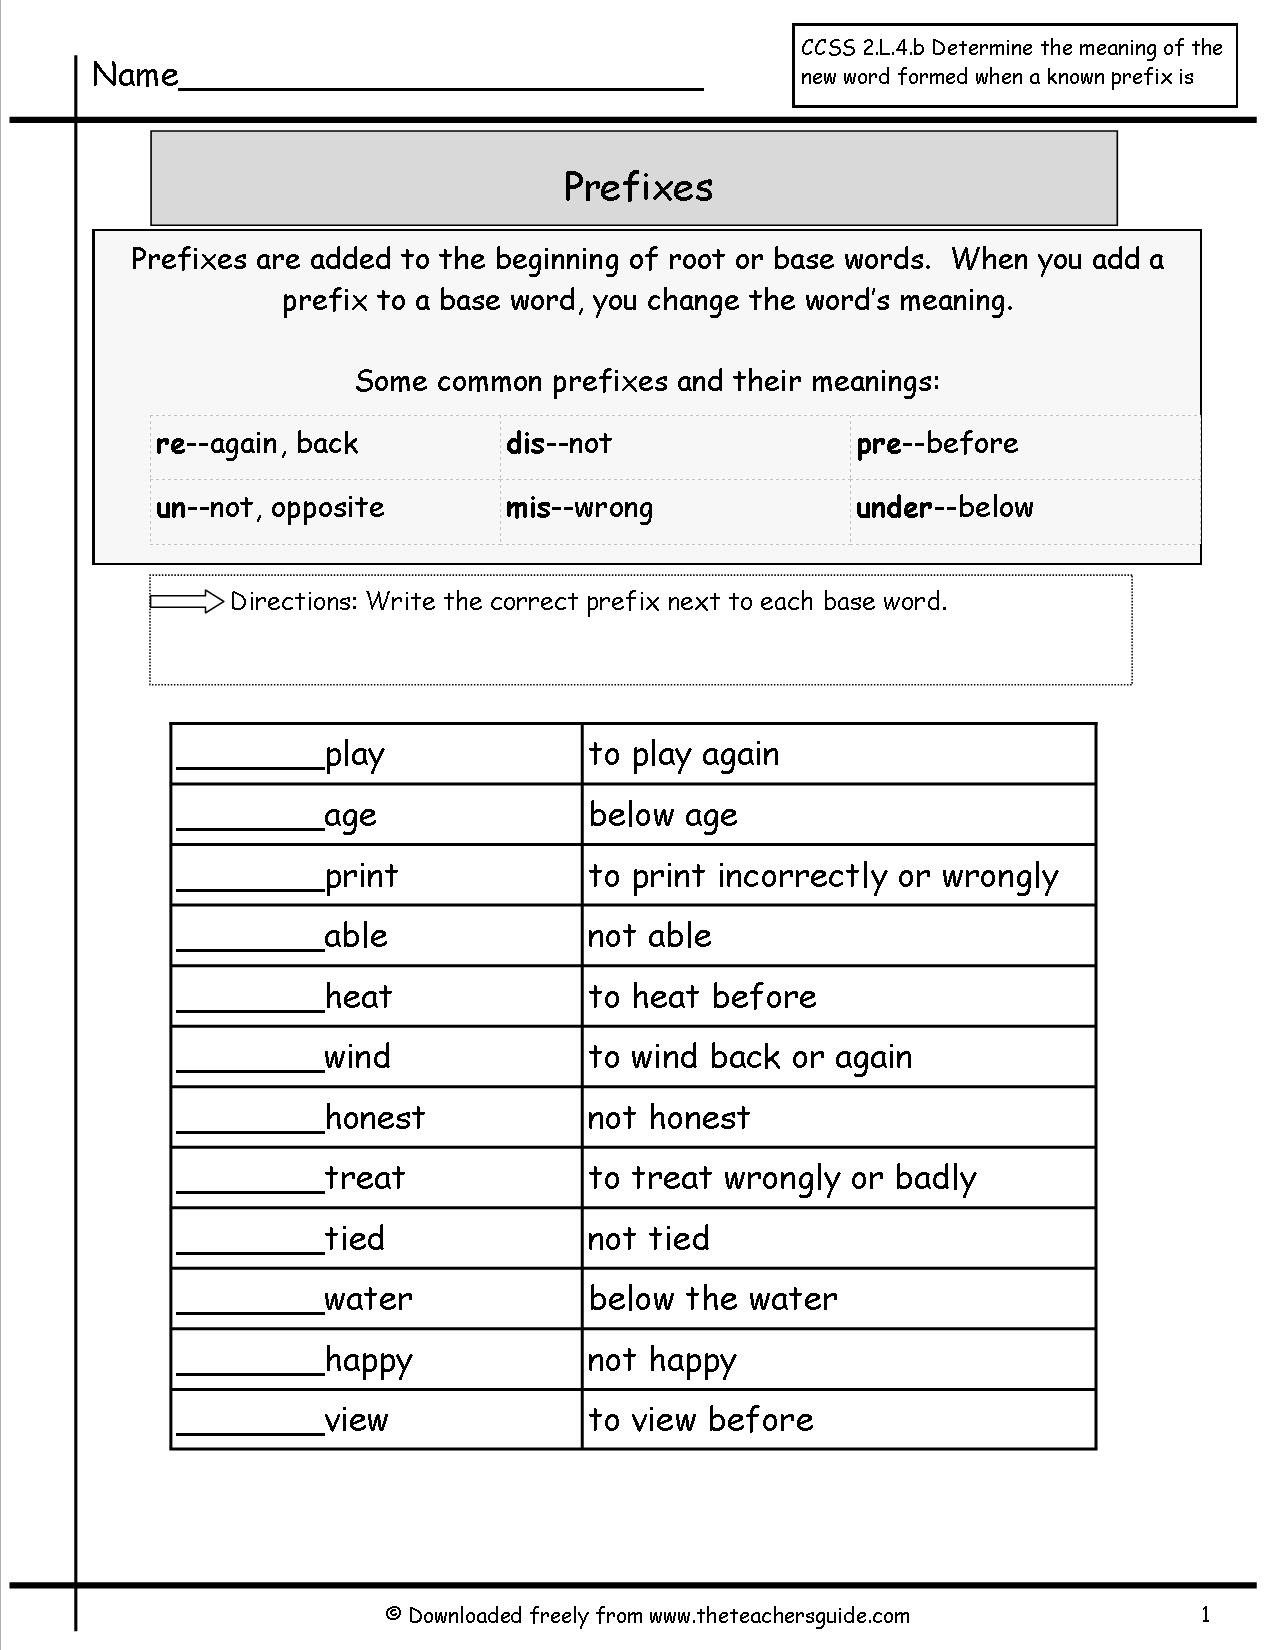 Suffix Worksheets for 4th Grade Free Prefixes and Suffixes Worksheets From the Teacher S Guide